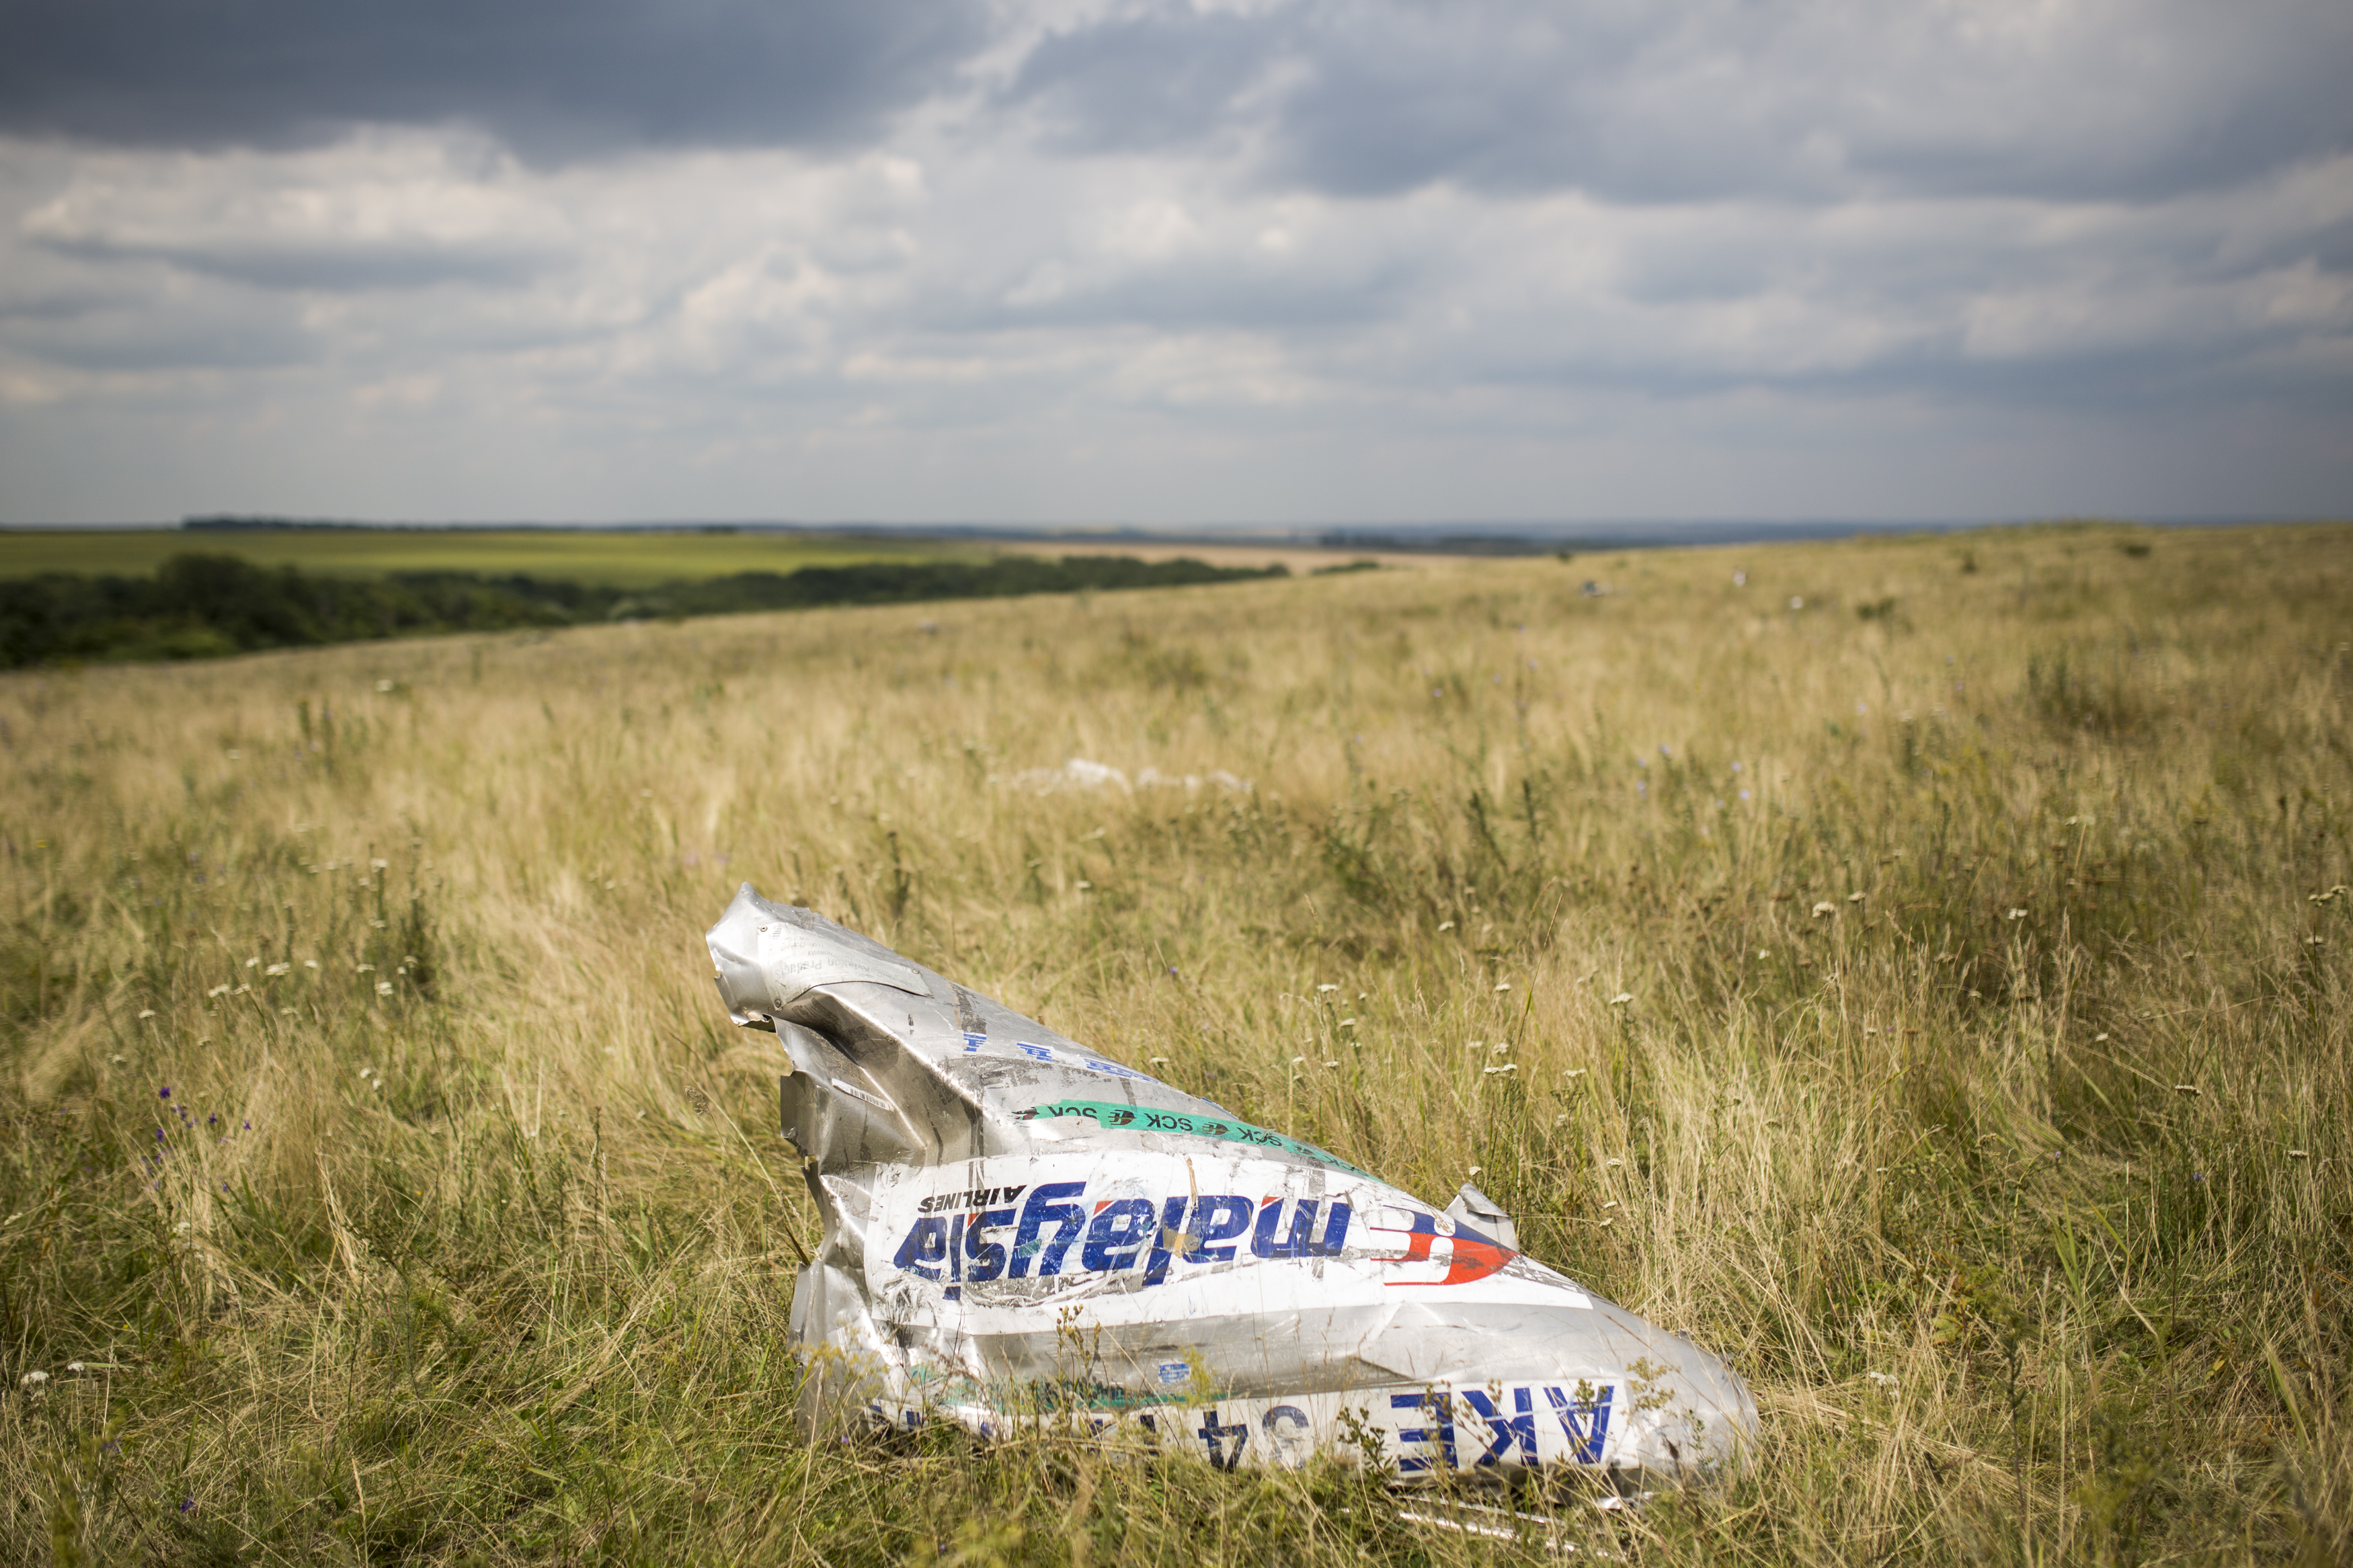 298 Crew And Passengers Perish On Flight MH17 After Suspected Missile Attack In Ukraine